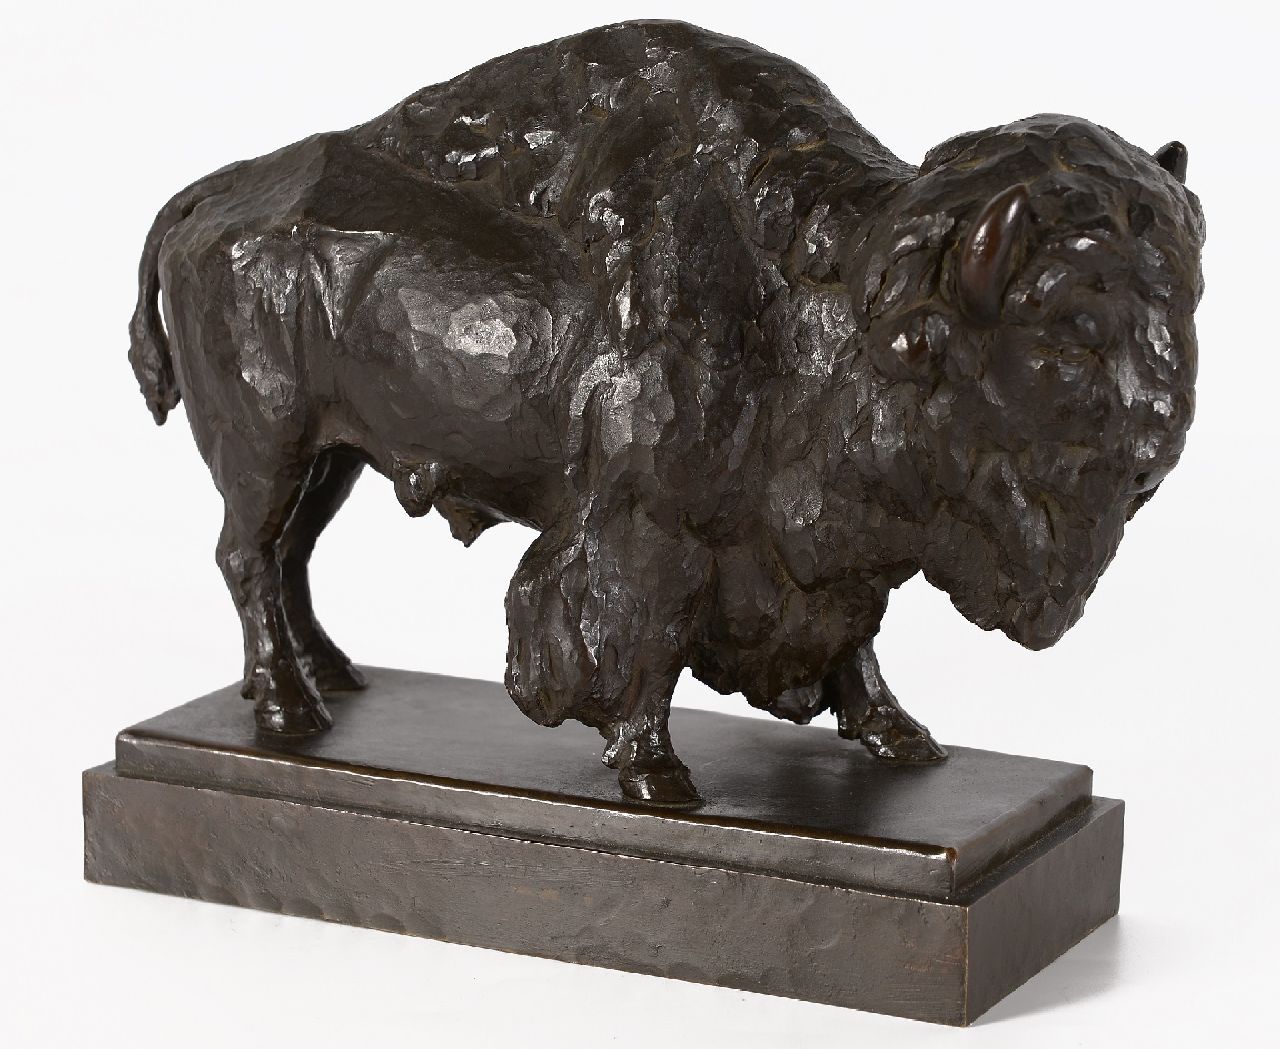 Europese School, begin 20e eeuw | Bison, bronze, 19.0 x 25.0 cm, signed on the base  'I. Vonka' and dated 1913